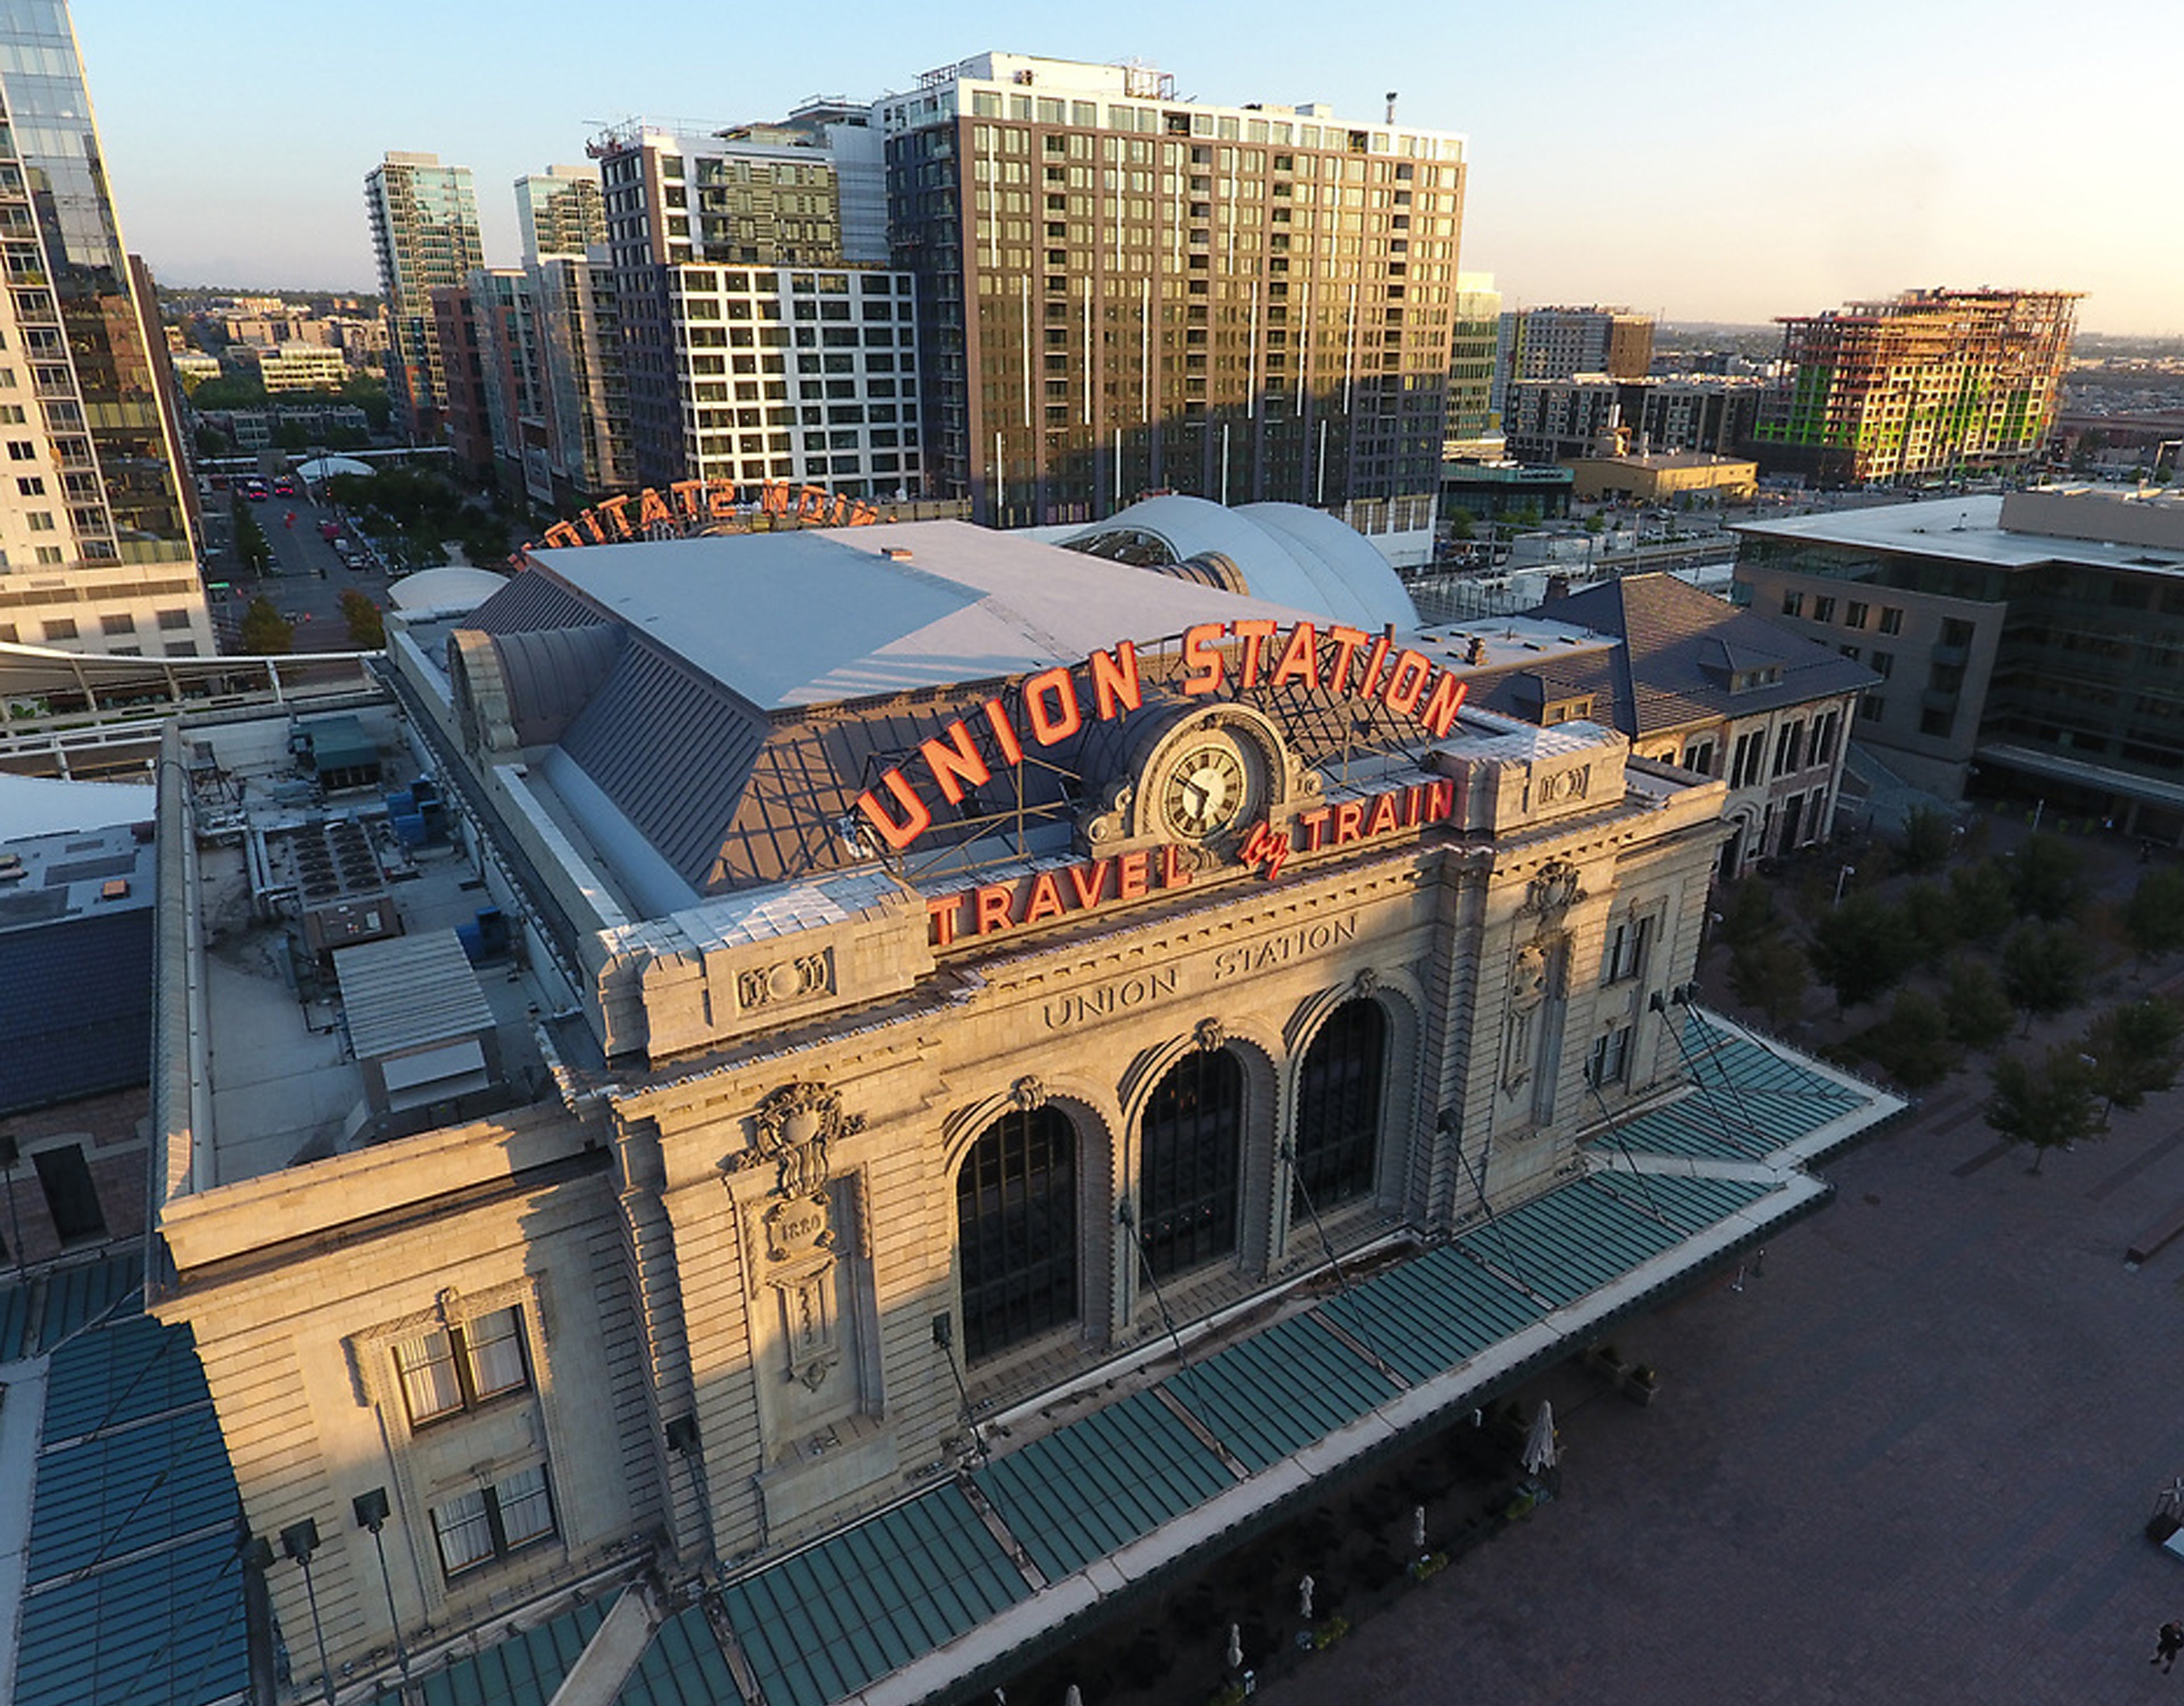 Denver Union Station is just a quick walk from Hotel